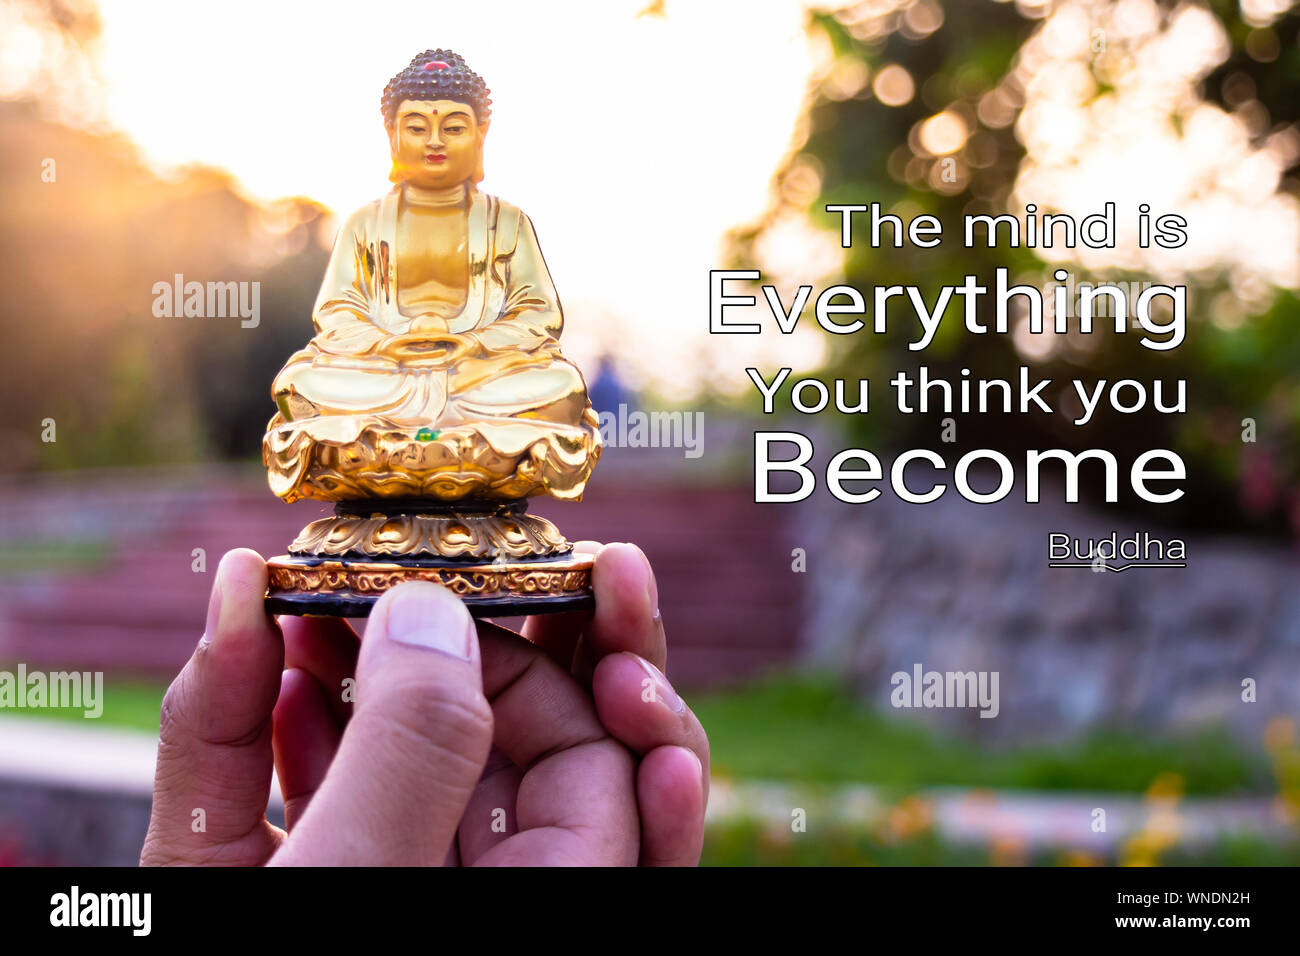 the mind is everything what you think you become - buddha(1) Stock Photo